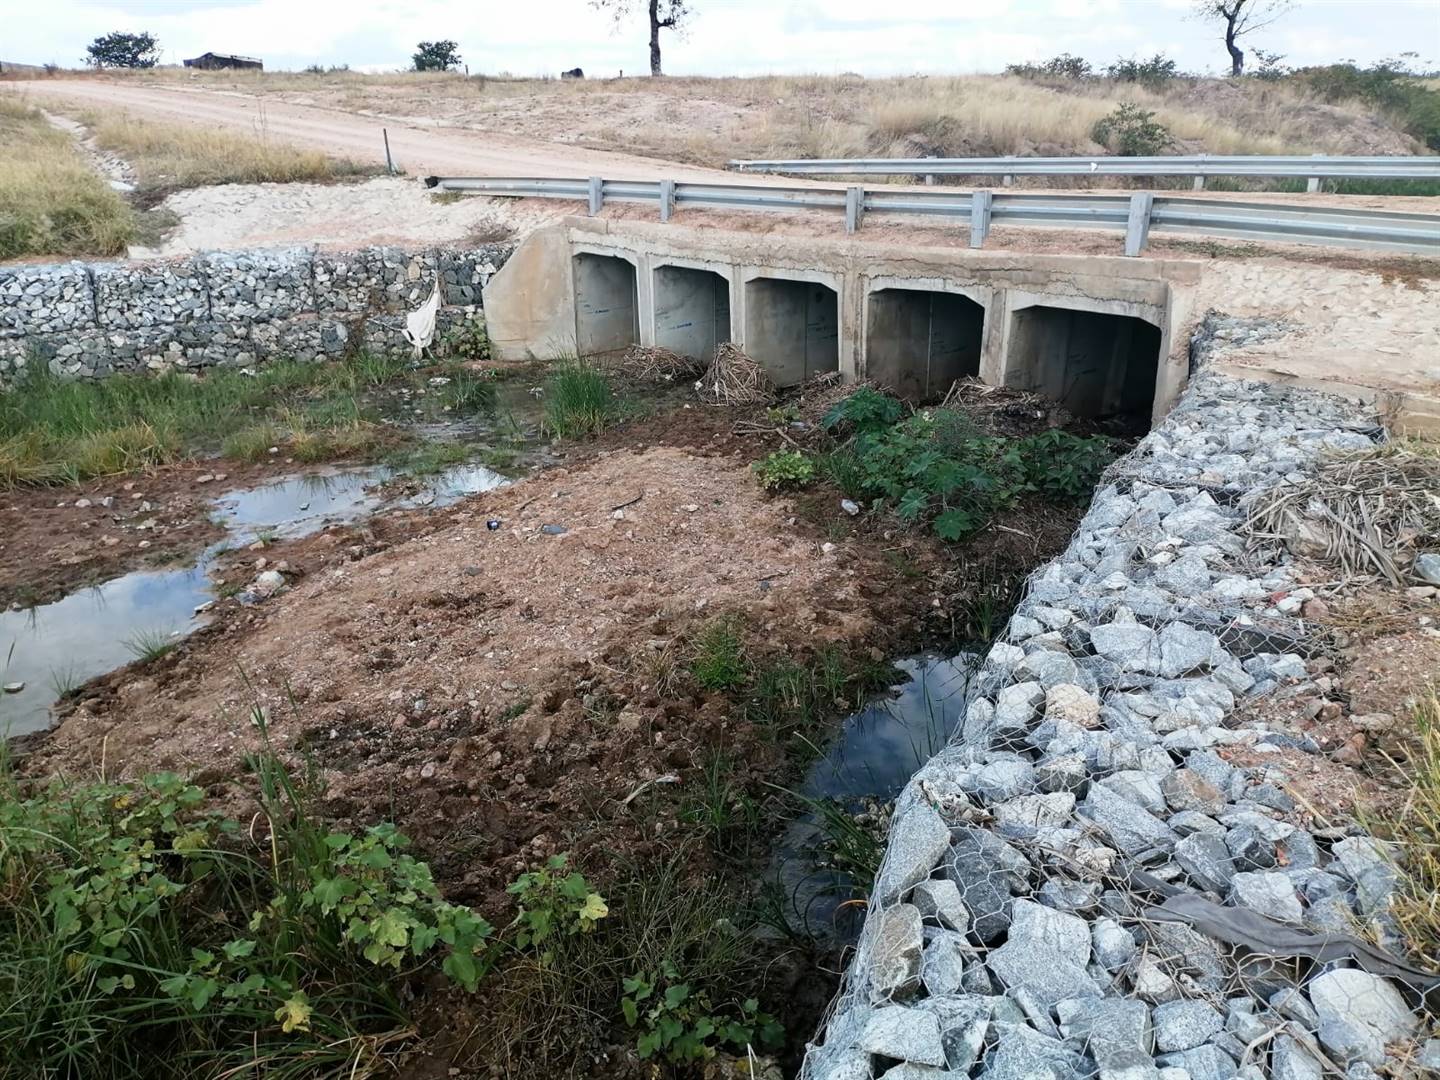 The storm water culvert in Limpopo, which cost almost R5 million